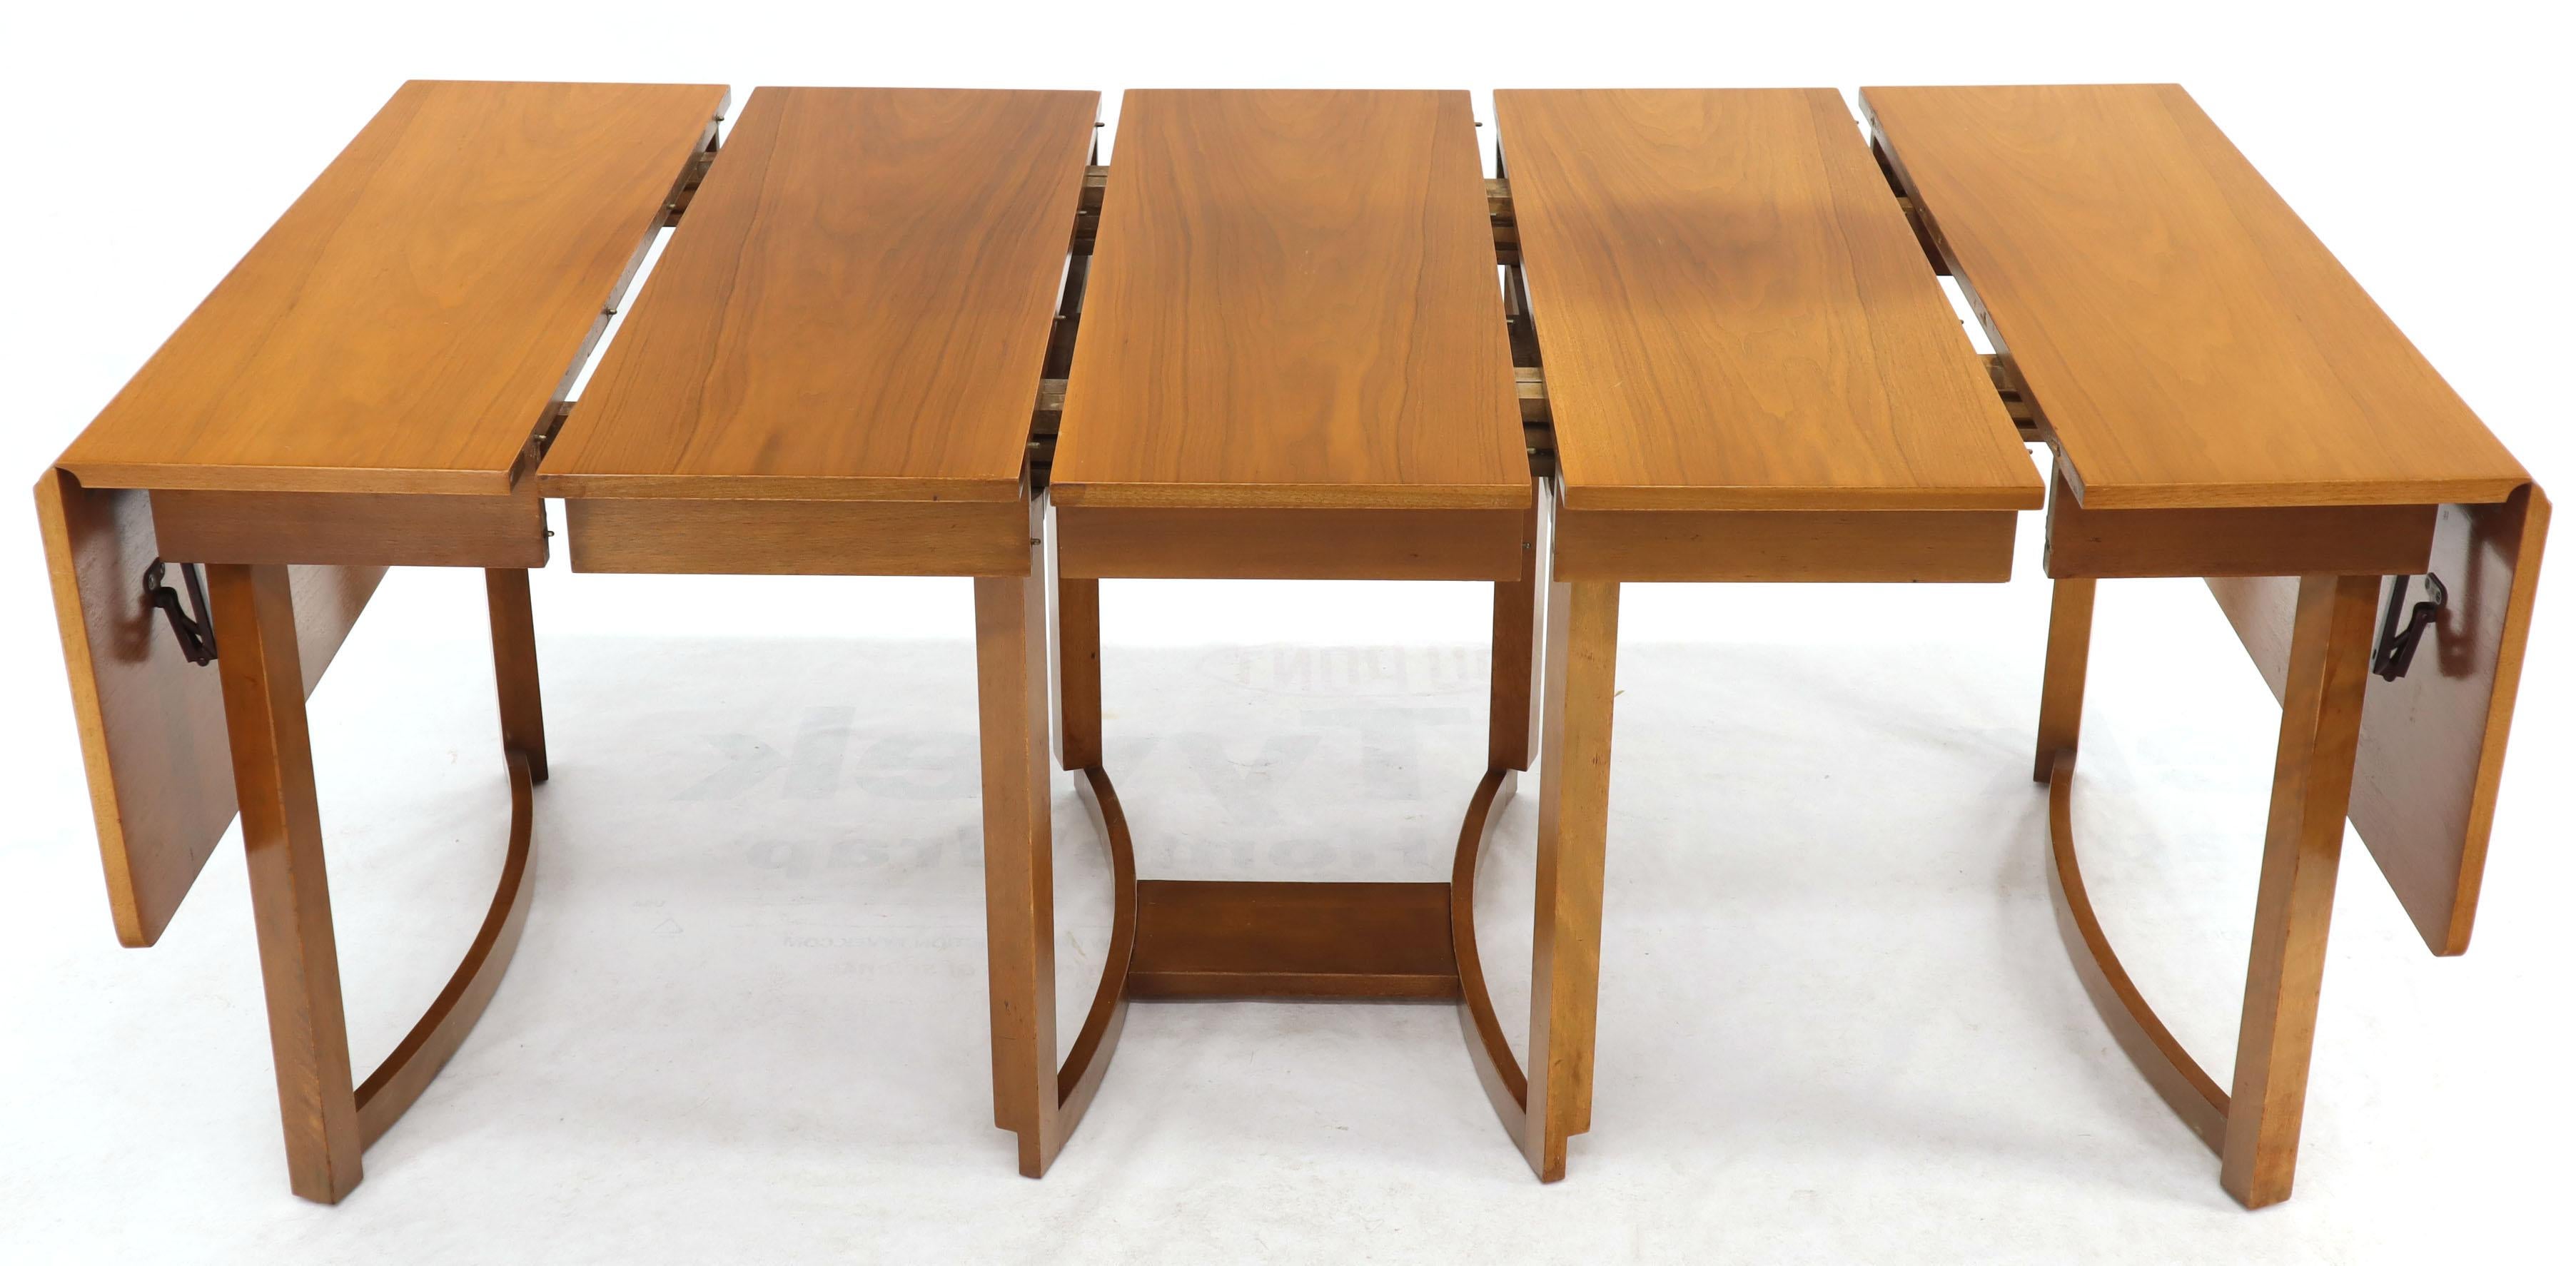 Midcentury Light Walnut Drop Leaf Expandable Dining Table, Three Leafs Boards For Sale 3